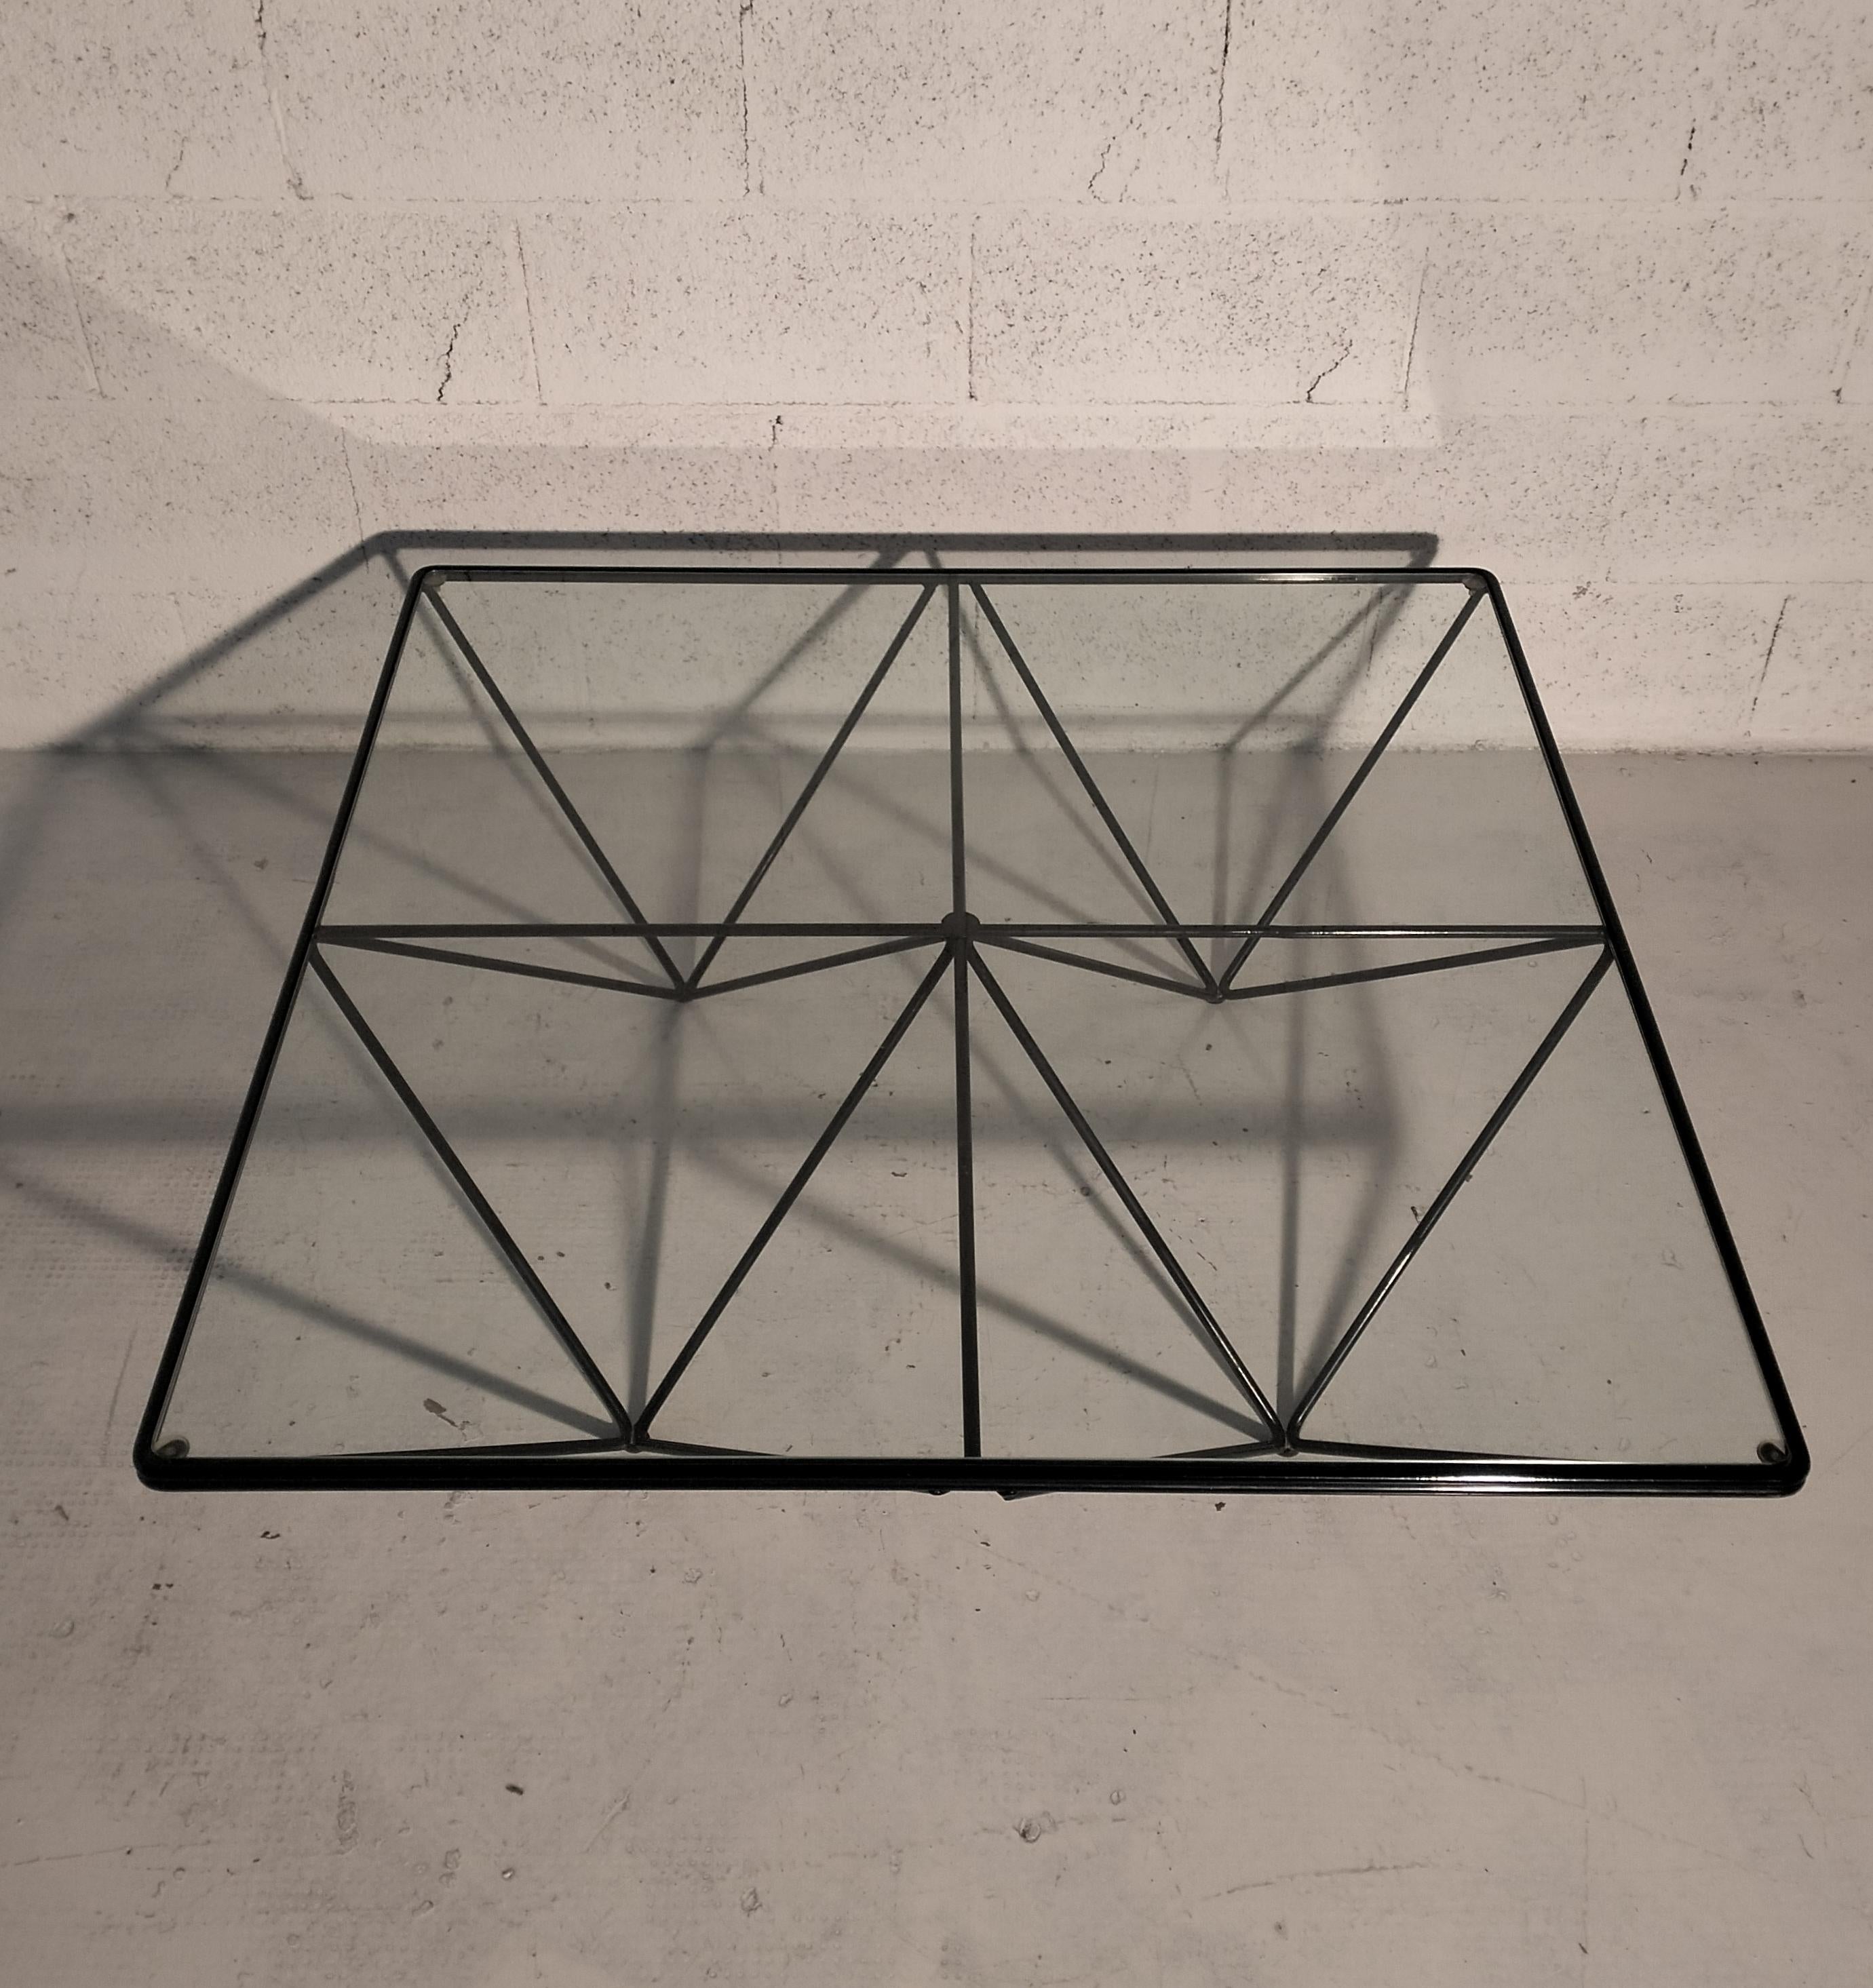 Alanda metal and glass coffee table by Paolo Piva for B&B Italia 70-80s

The Alanda coffee table, an iconic piece that ushered in the 1980s, is reissued as a tribute to Paolo Piva, the great architect and designer. A highly successful classic and